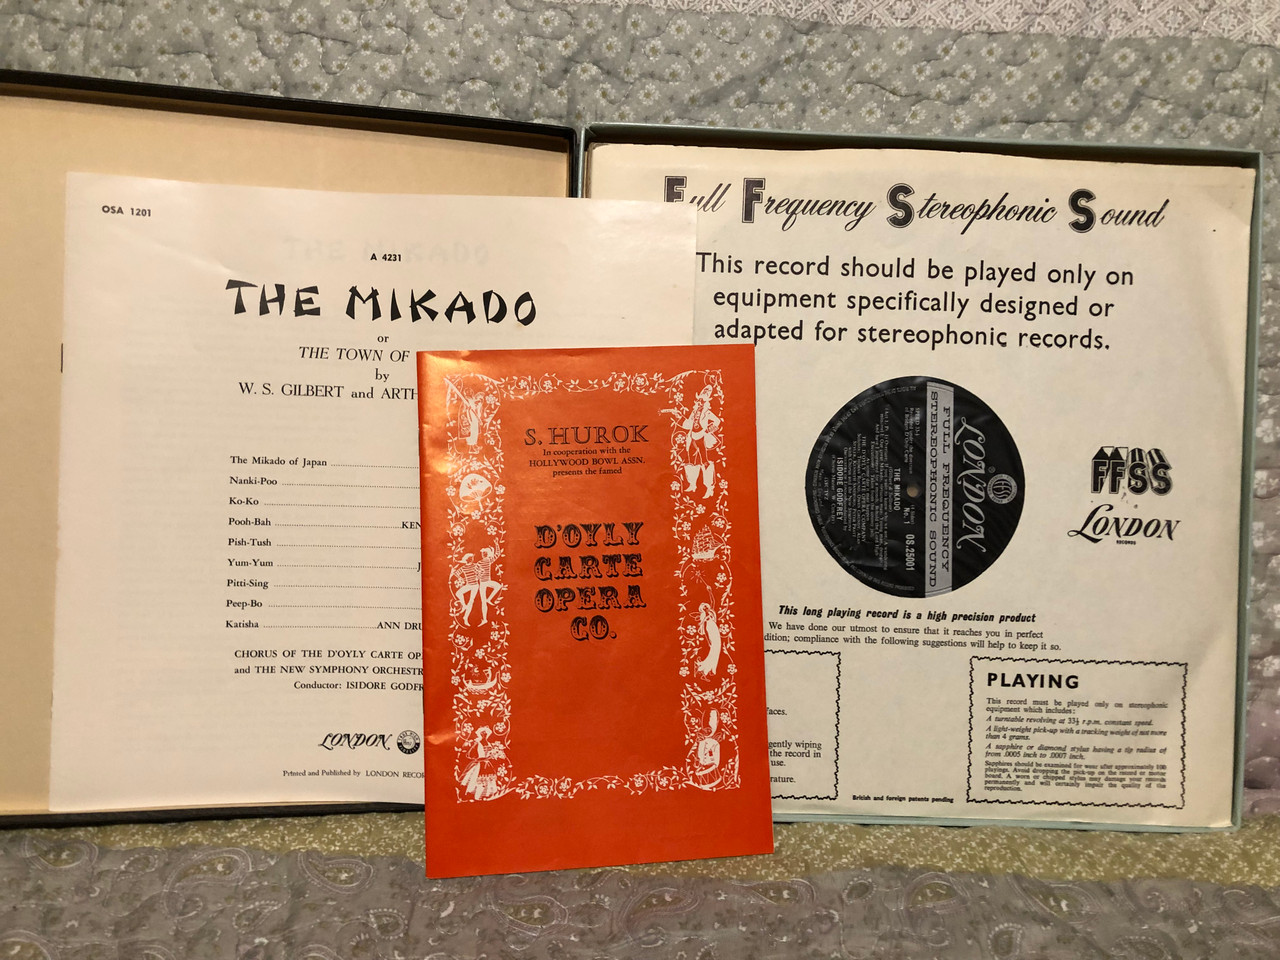 https://cdn10.bigcommerce.com/s-62bdpkt7pb/products/0/images/260238/Gilbert_And_Sullivan_-_The_Mikado_-_DOyly_Carte_Opera_Company_with_The_New_Symphony_Orchestra_Of_London_Conducted_By_Isidore_Godfrey_London_Records_2x_LP_OSA-1201_2__91154.1670520816.1280.1280.JPG?c=2&_gl=1*1x4x9f6*_ga*MjA2NTIxMjE2MC4xNTkwNTEyNTMy*_ga_WS2VZYPC6G*MTY3MDUxMTg2My42NjEuMS4xNjcwNTIwNzYwLjYwLjAuMA..